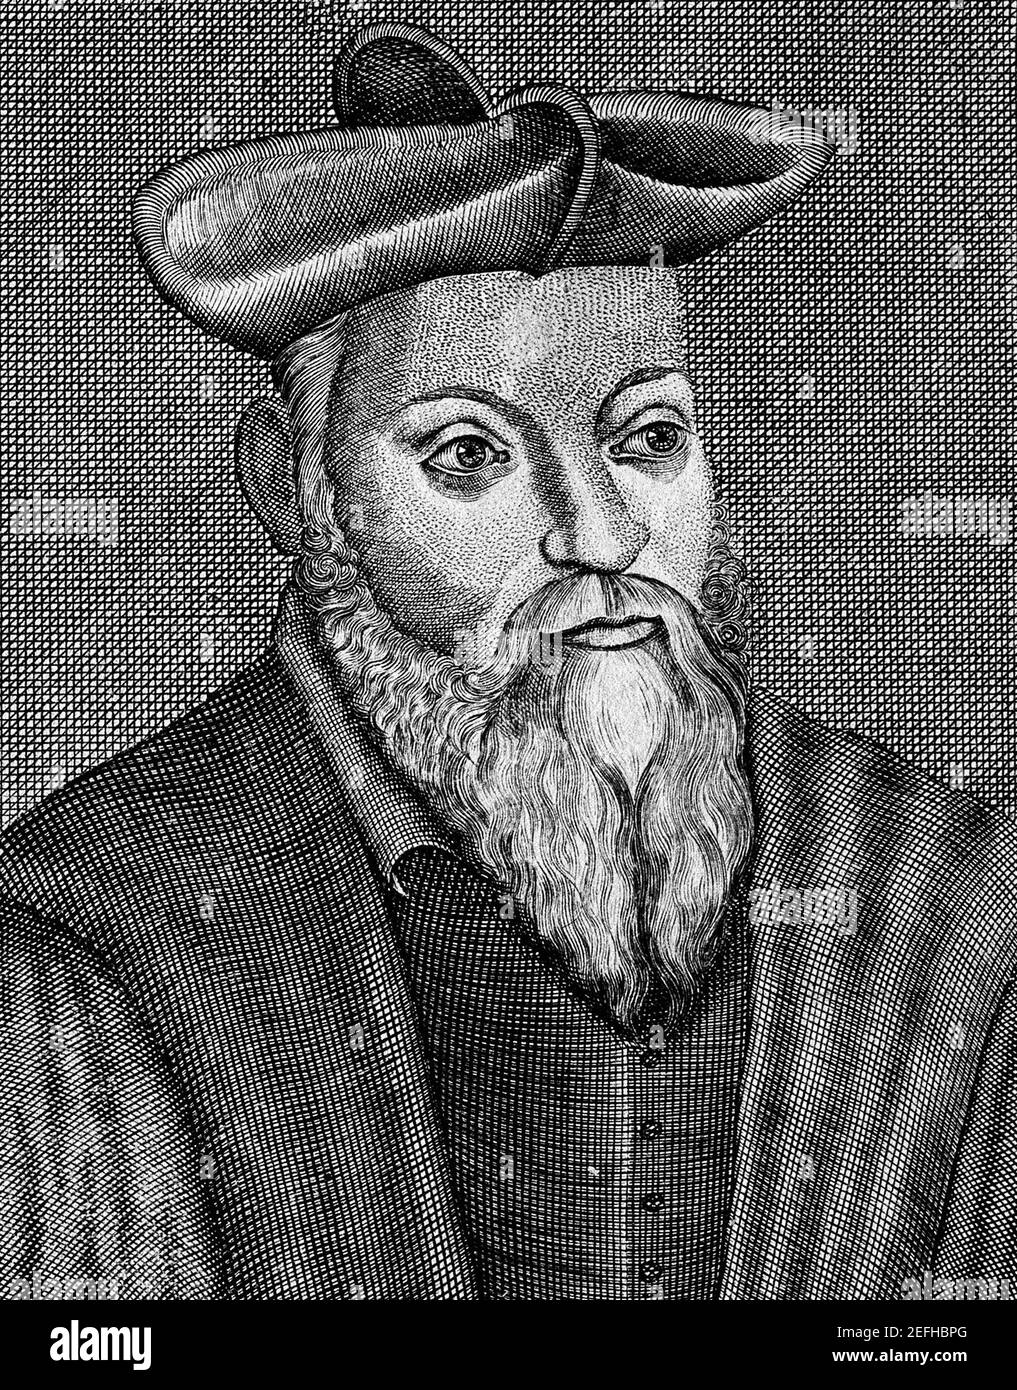 Michael Nostradamus (aka Michel de Nostredame) (born December 14, 1503, Saint-Rémy, France - died July 1/2, 1566, Salon) French astrologer, physician and reputed seer, who is best known for his book Les Prophéties, a collection of 942 poetic quatrains allegedly predicting future events. The book was first published in 1555. Line engraving by G. W. Knor/ Welcome Collection / File Reference # 1003-861THA Stock Photo